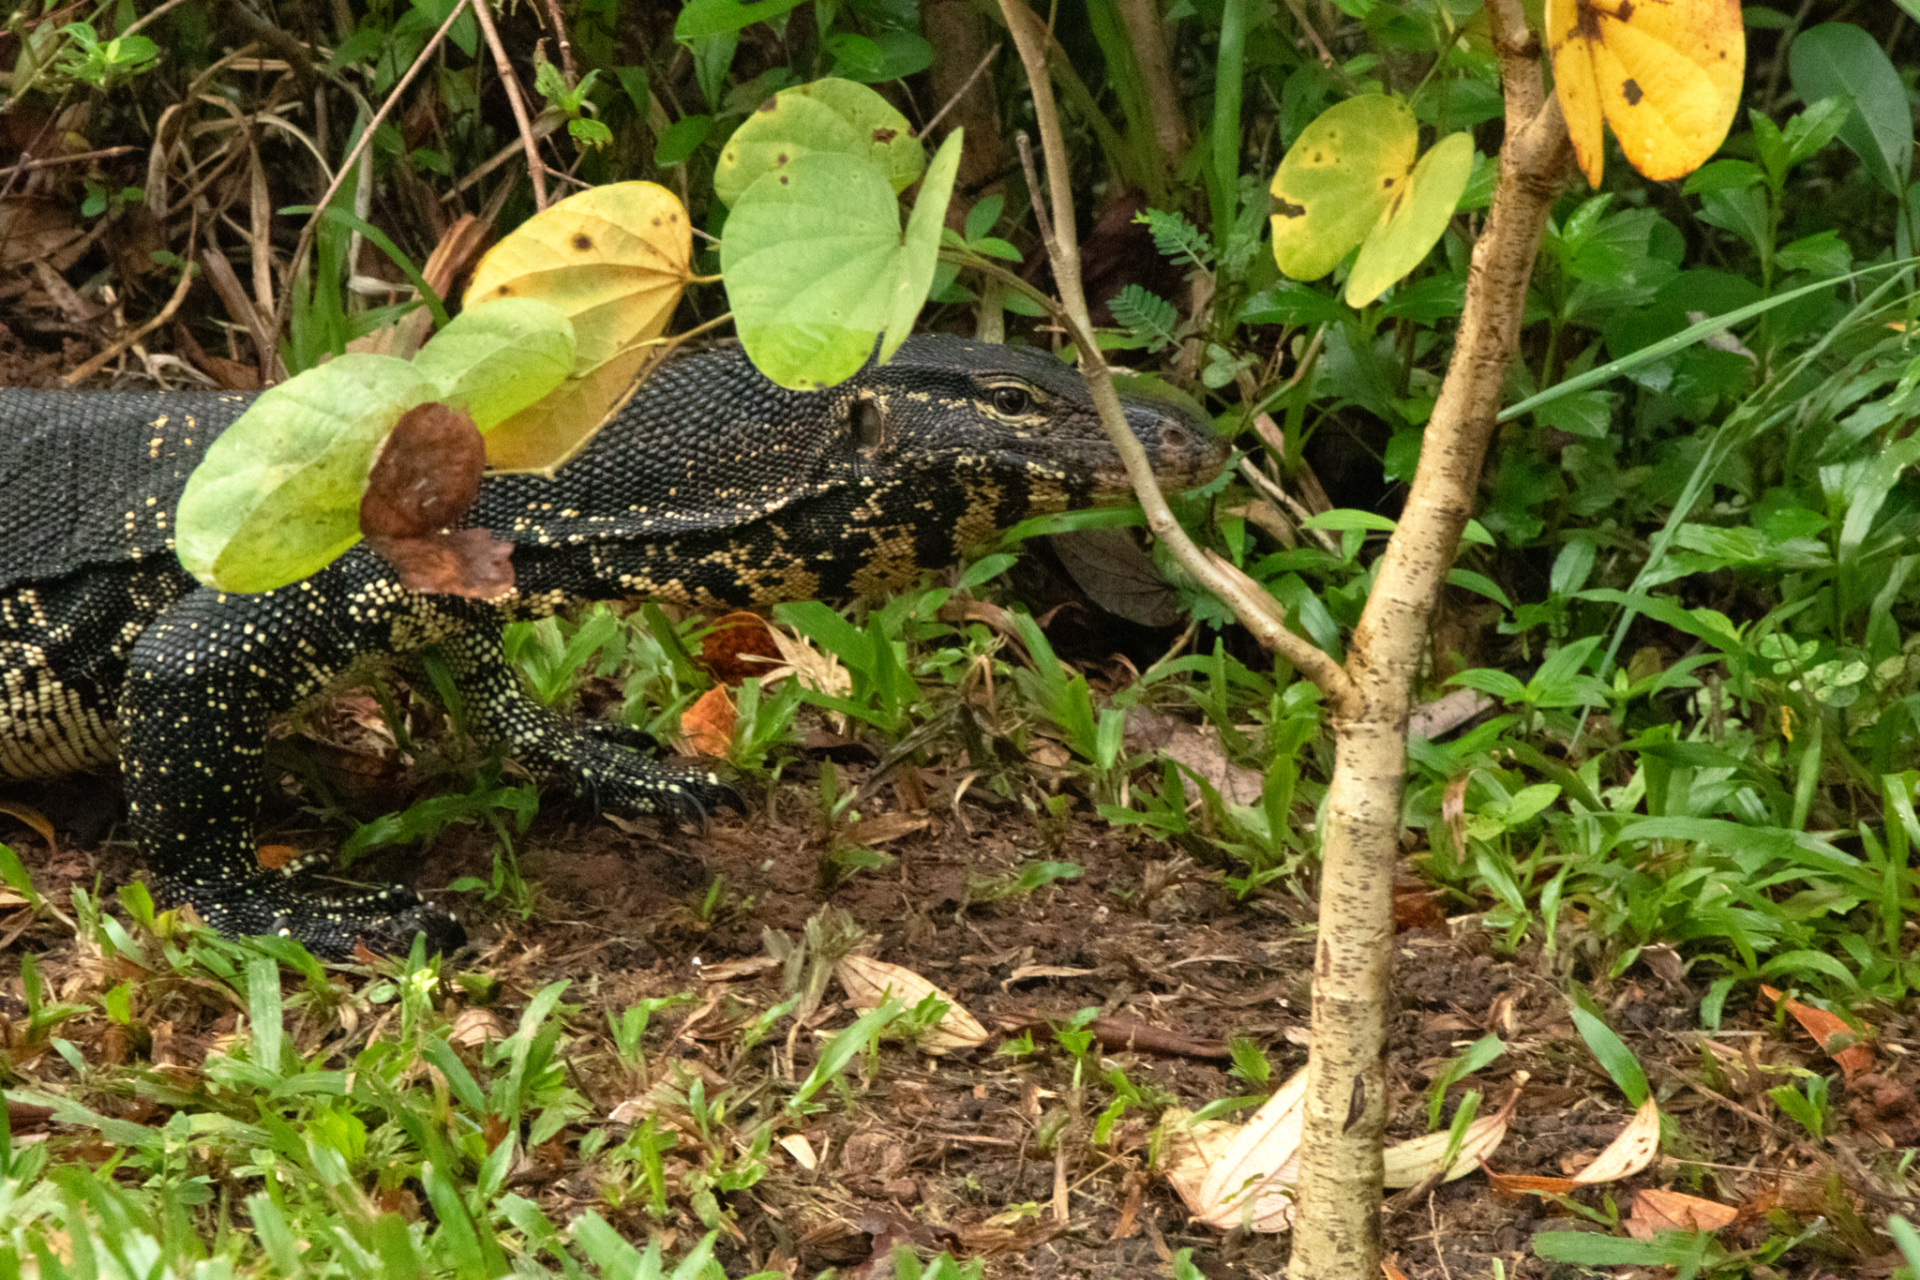 Wildlife like the water monitor lizard have made a home in Diyasaru Wetland Park. (Photo by Tristan Bove)